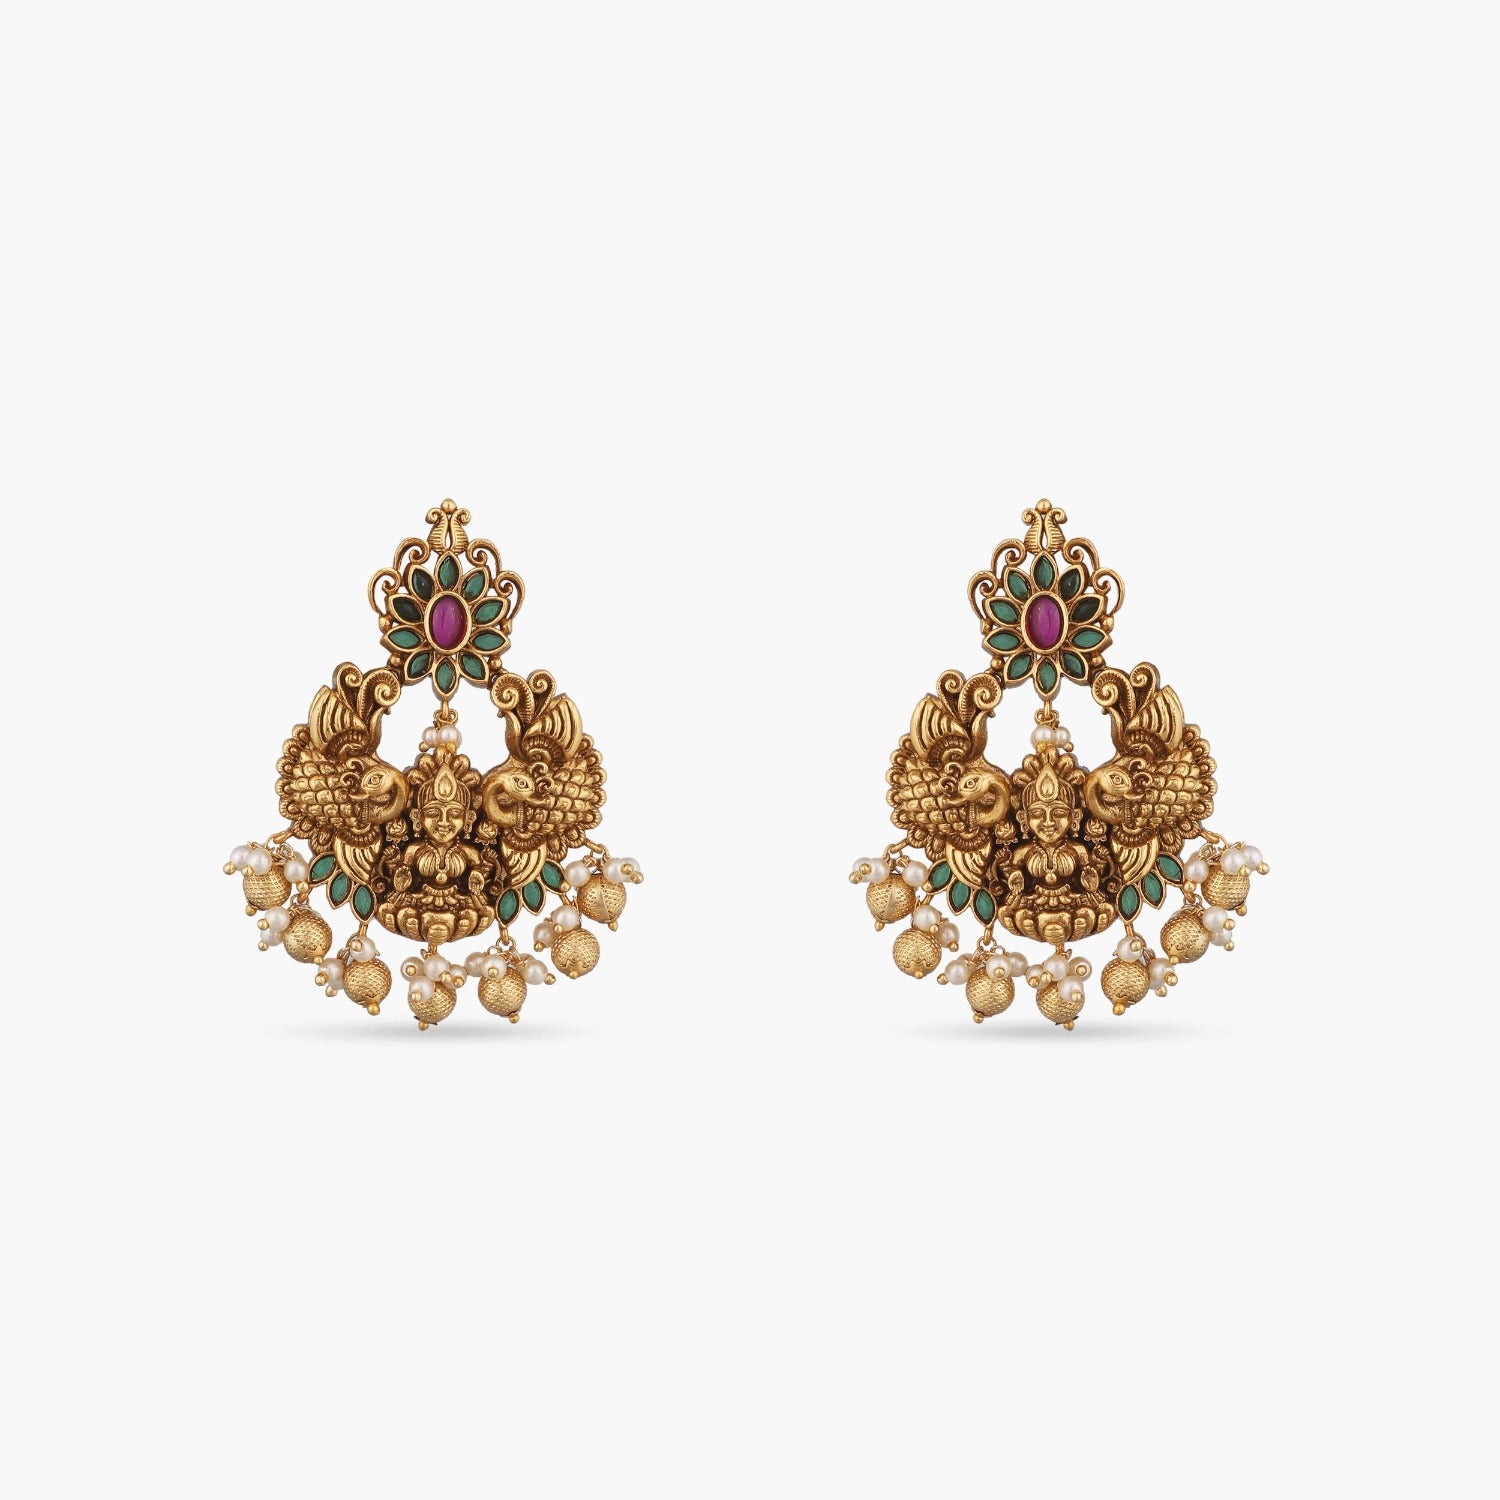 Antique gold - Gold earrings - Trium jewelry